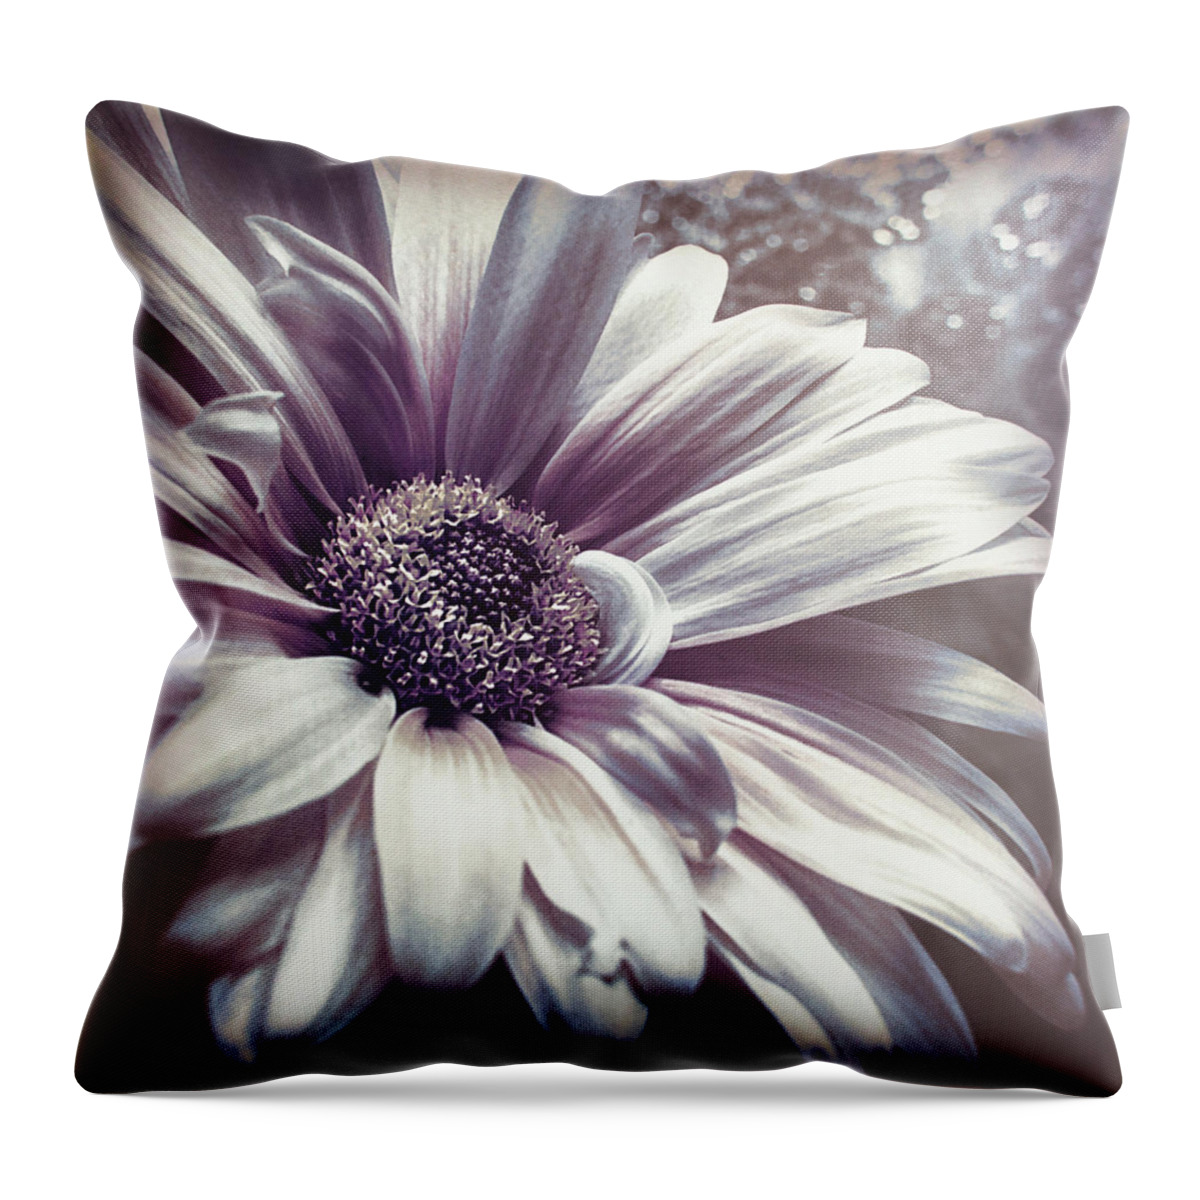 Floral Throw Pillow featuring the photograph Yesterday Morning by Darlene Kwiatkowski